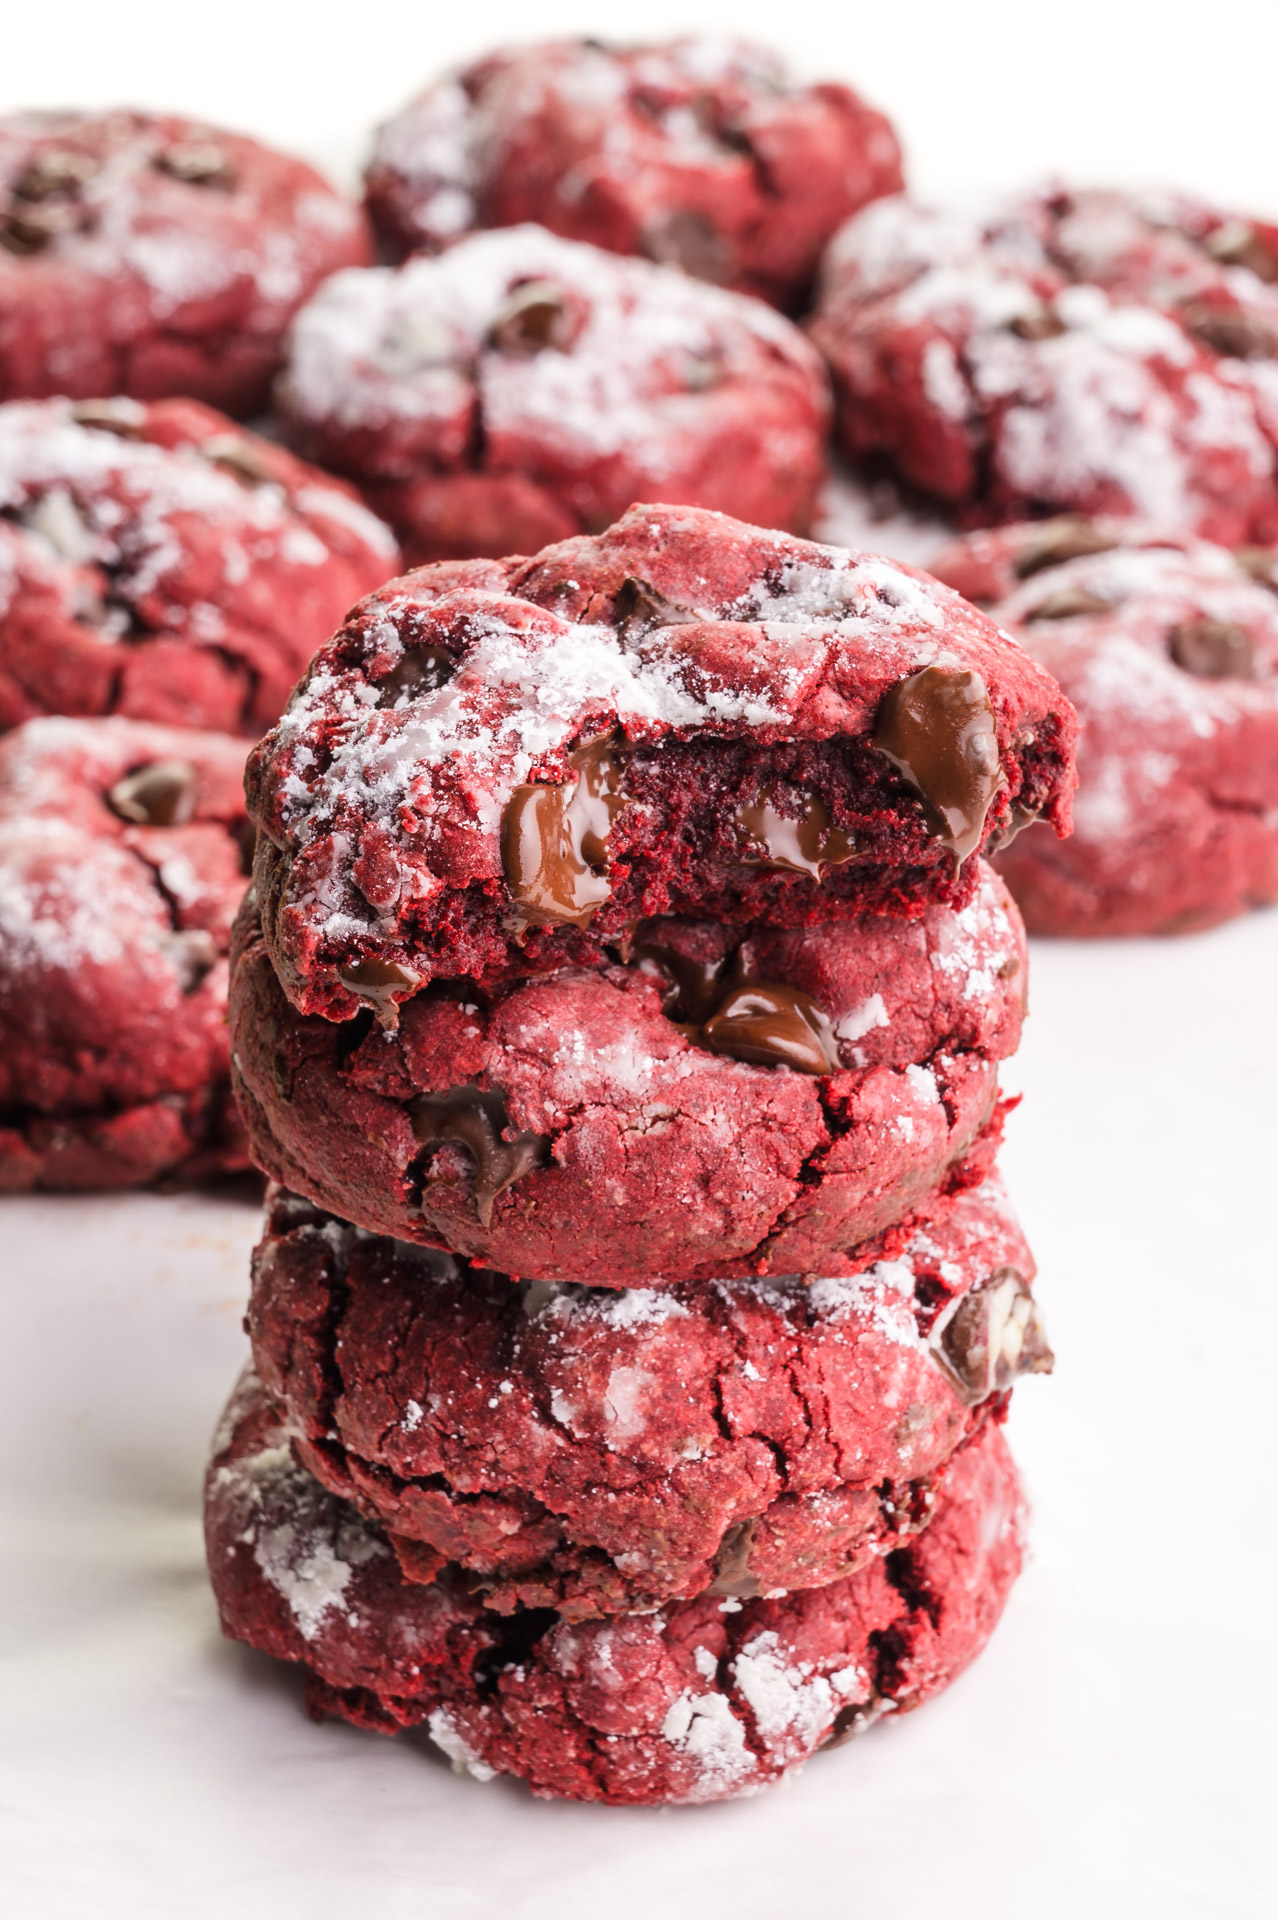 A stack of vegan red velvet cookies shows the top one with a bite taken out. There are more cookies in the background.